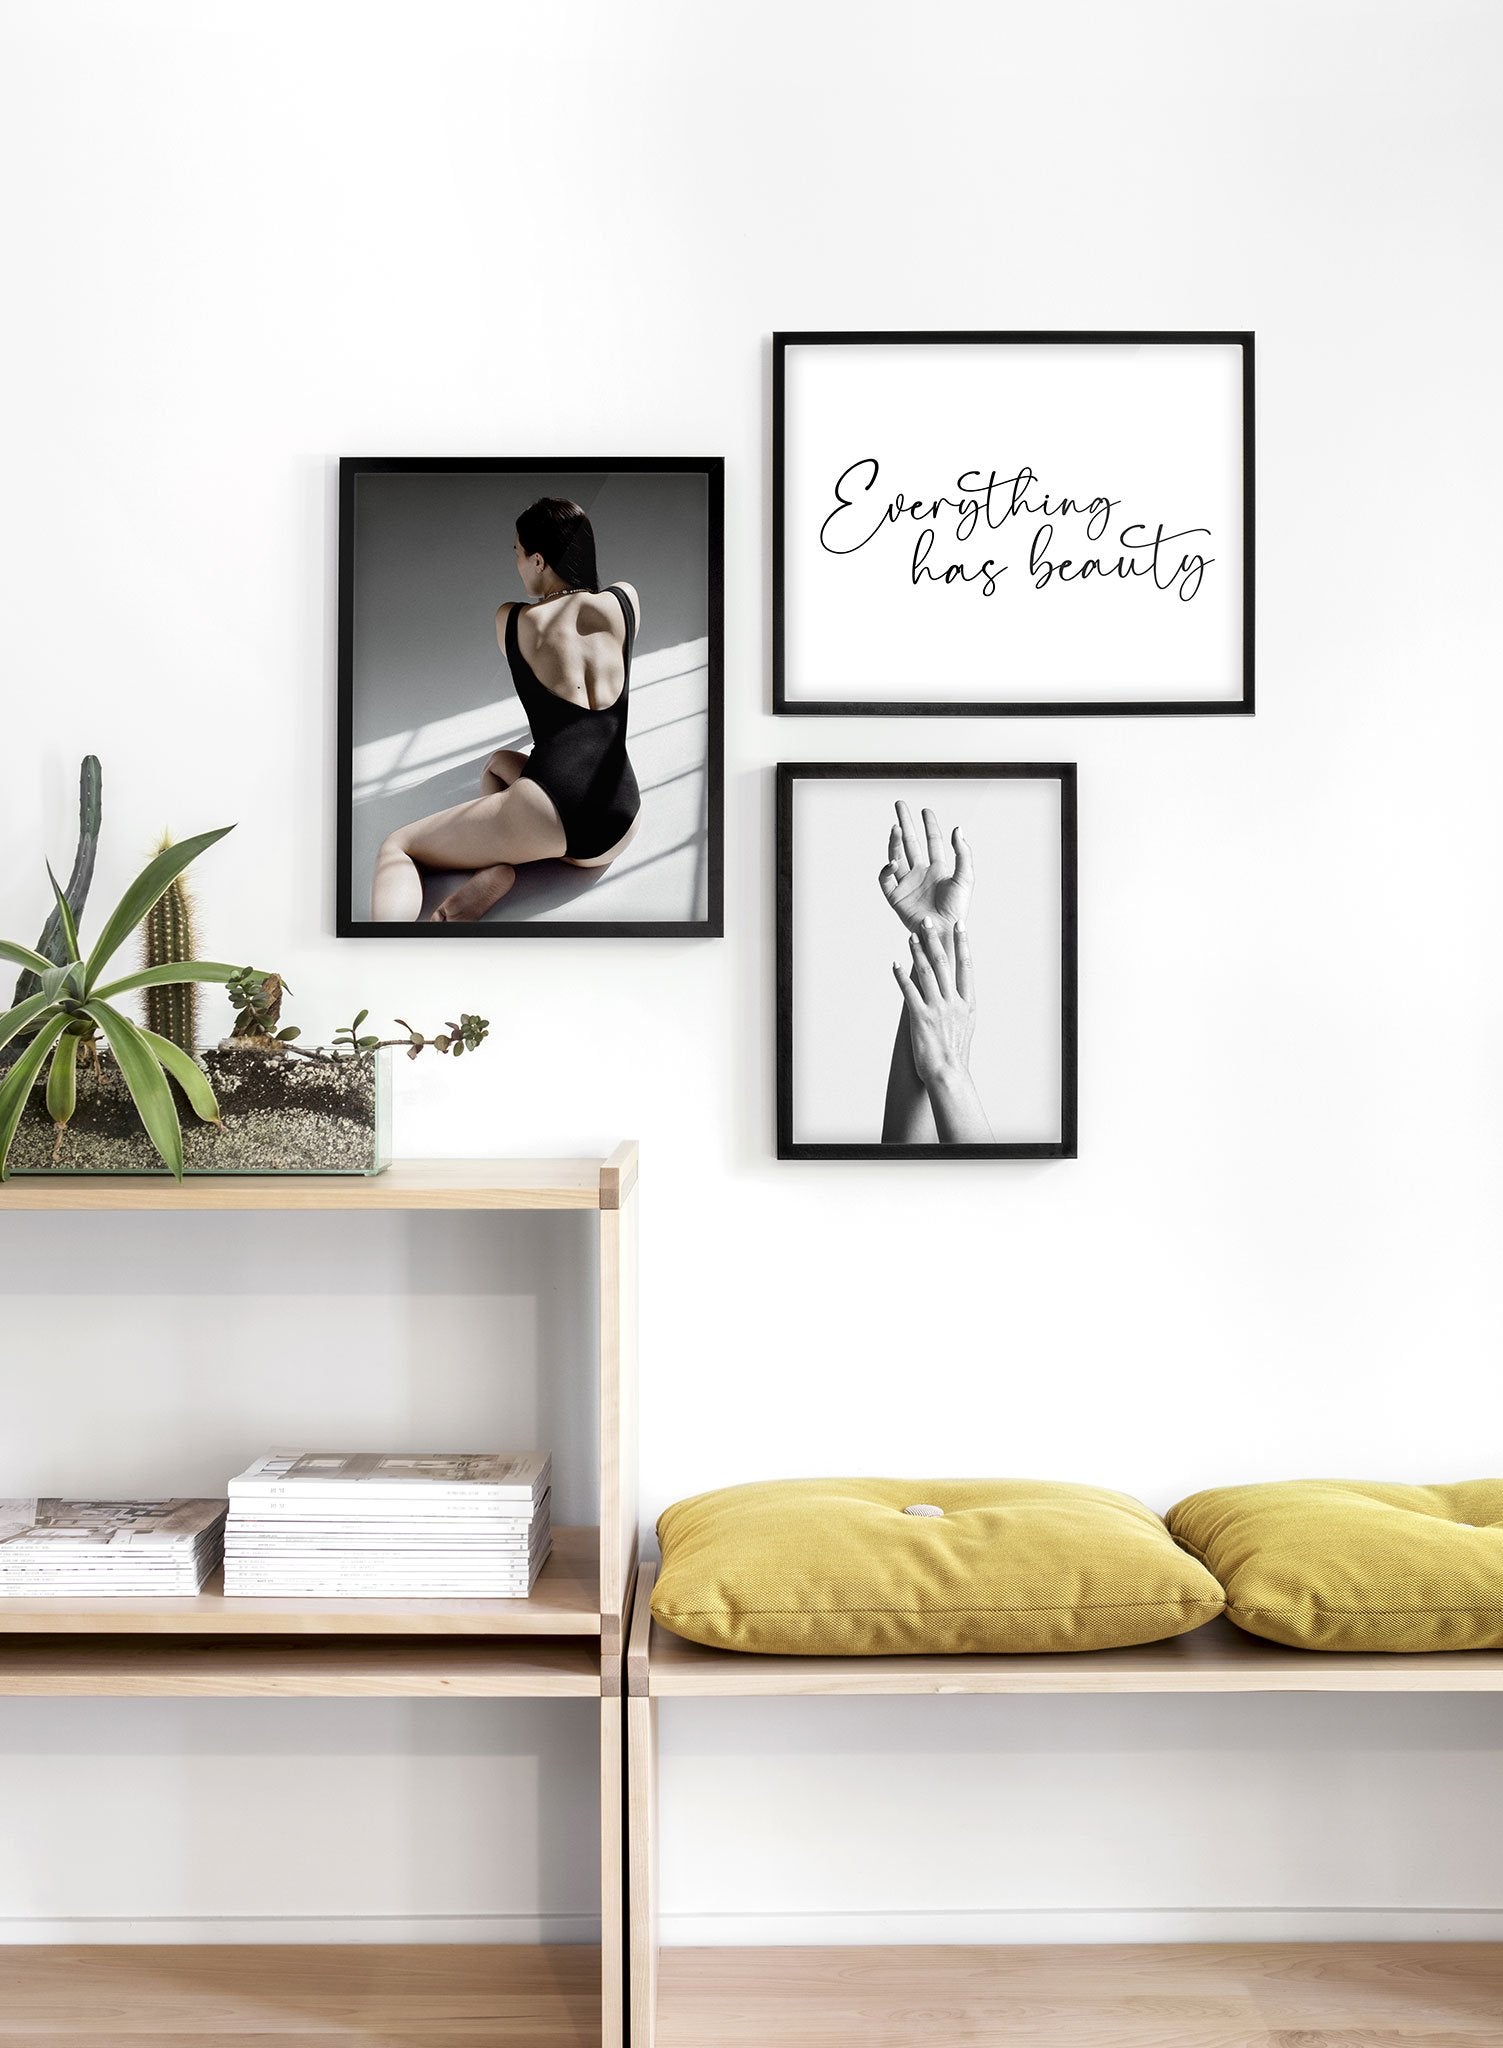 Fashion photography poster by Opposite Wall with Backless woman - Lifestyle Trio - Living Room